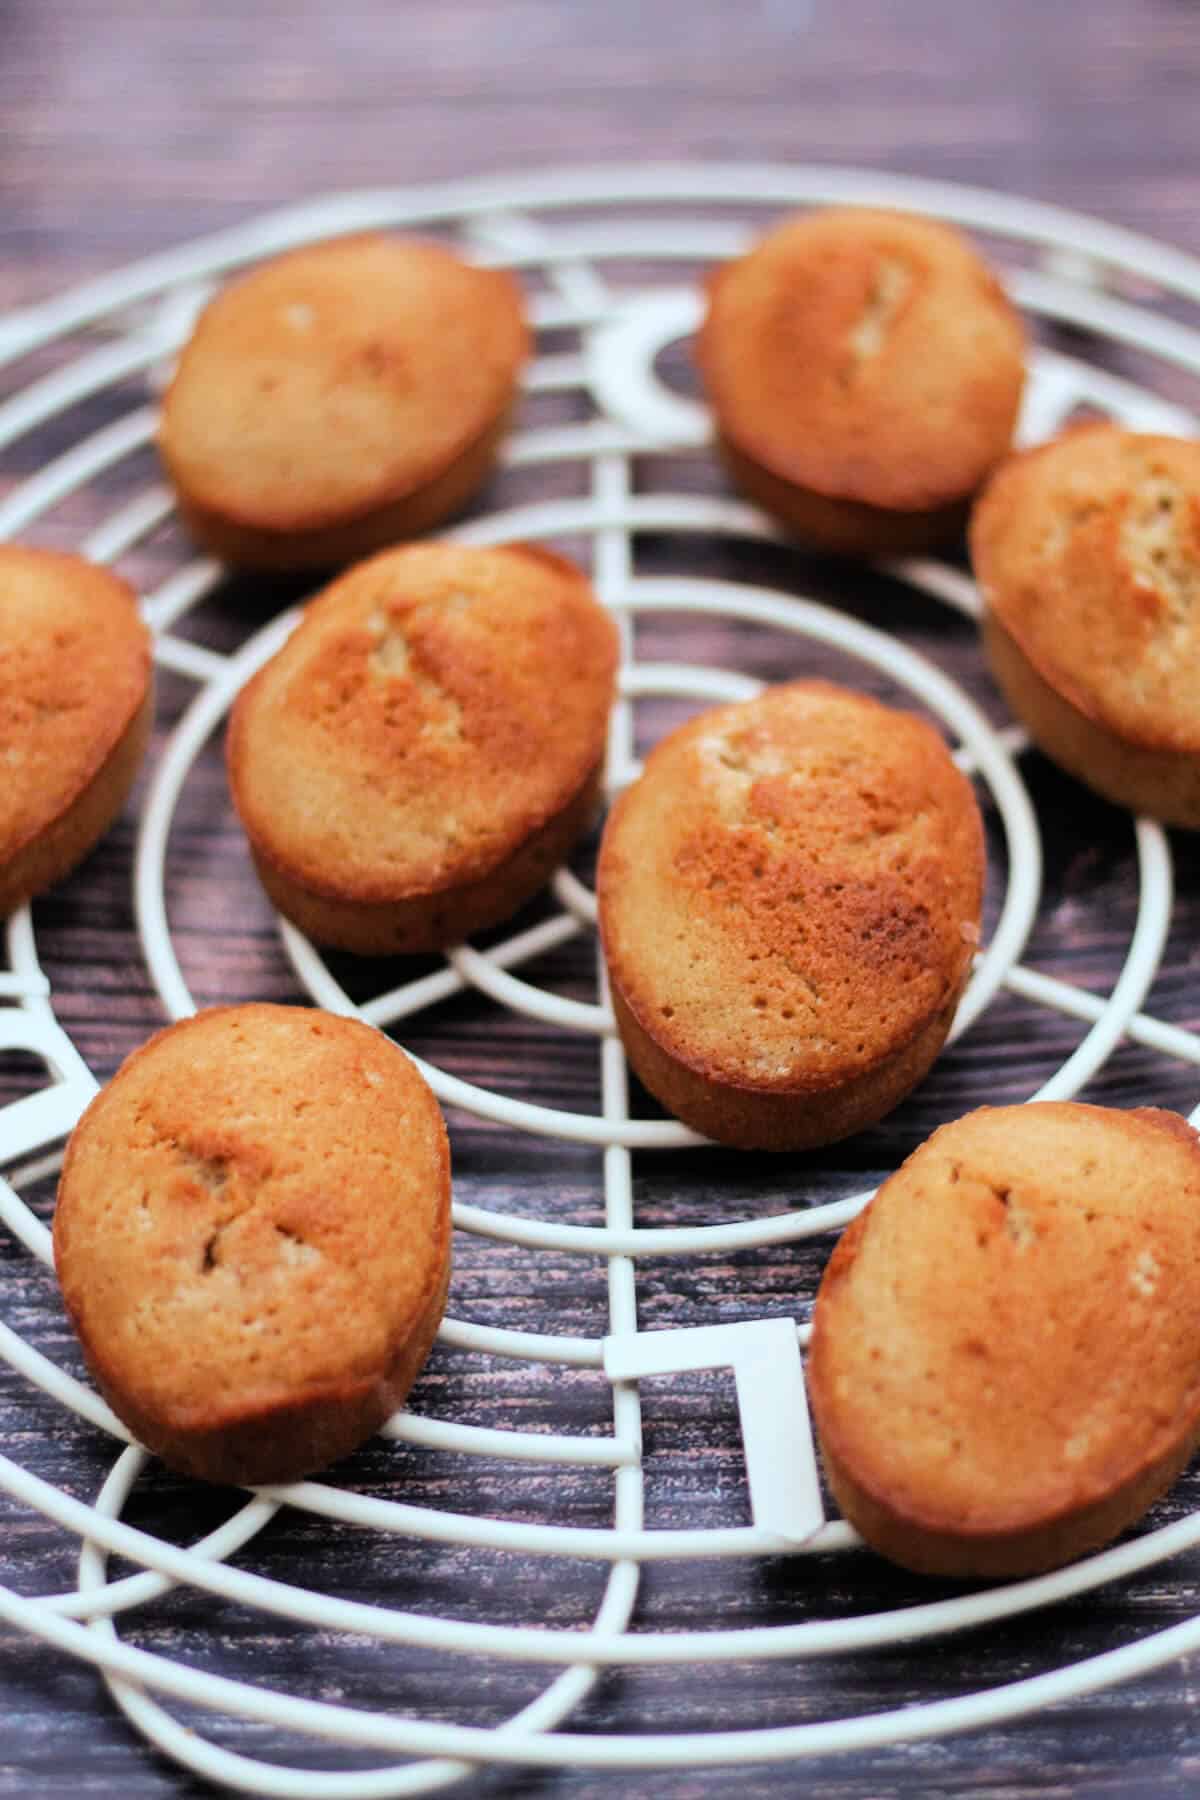 Small ginger cakes on a round cooling rack.